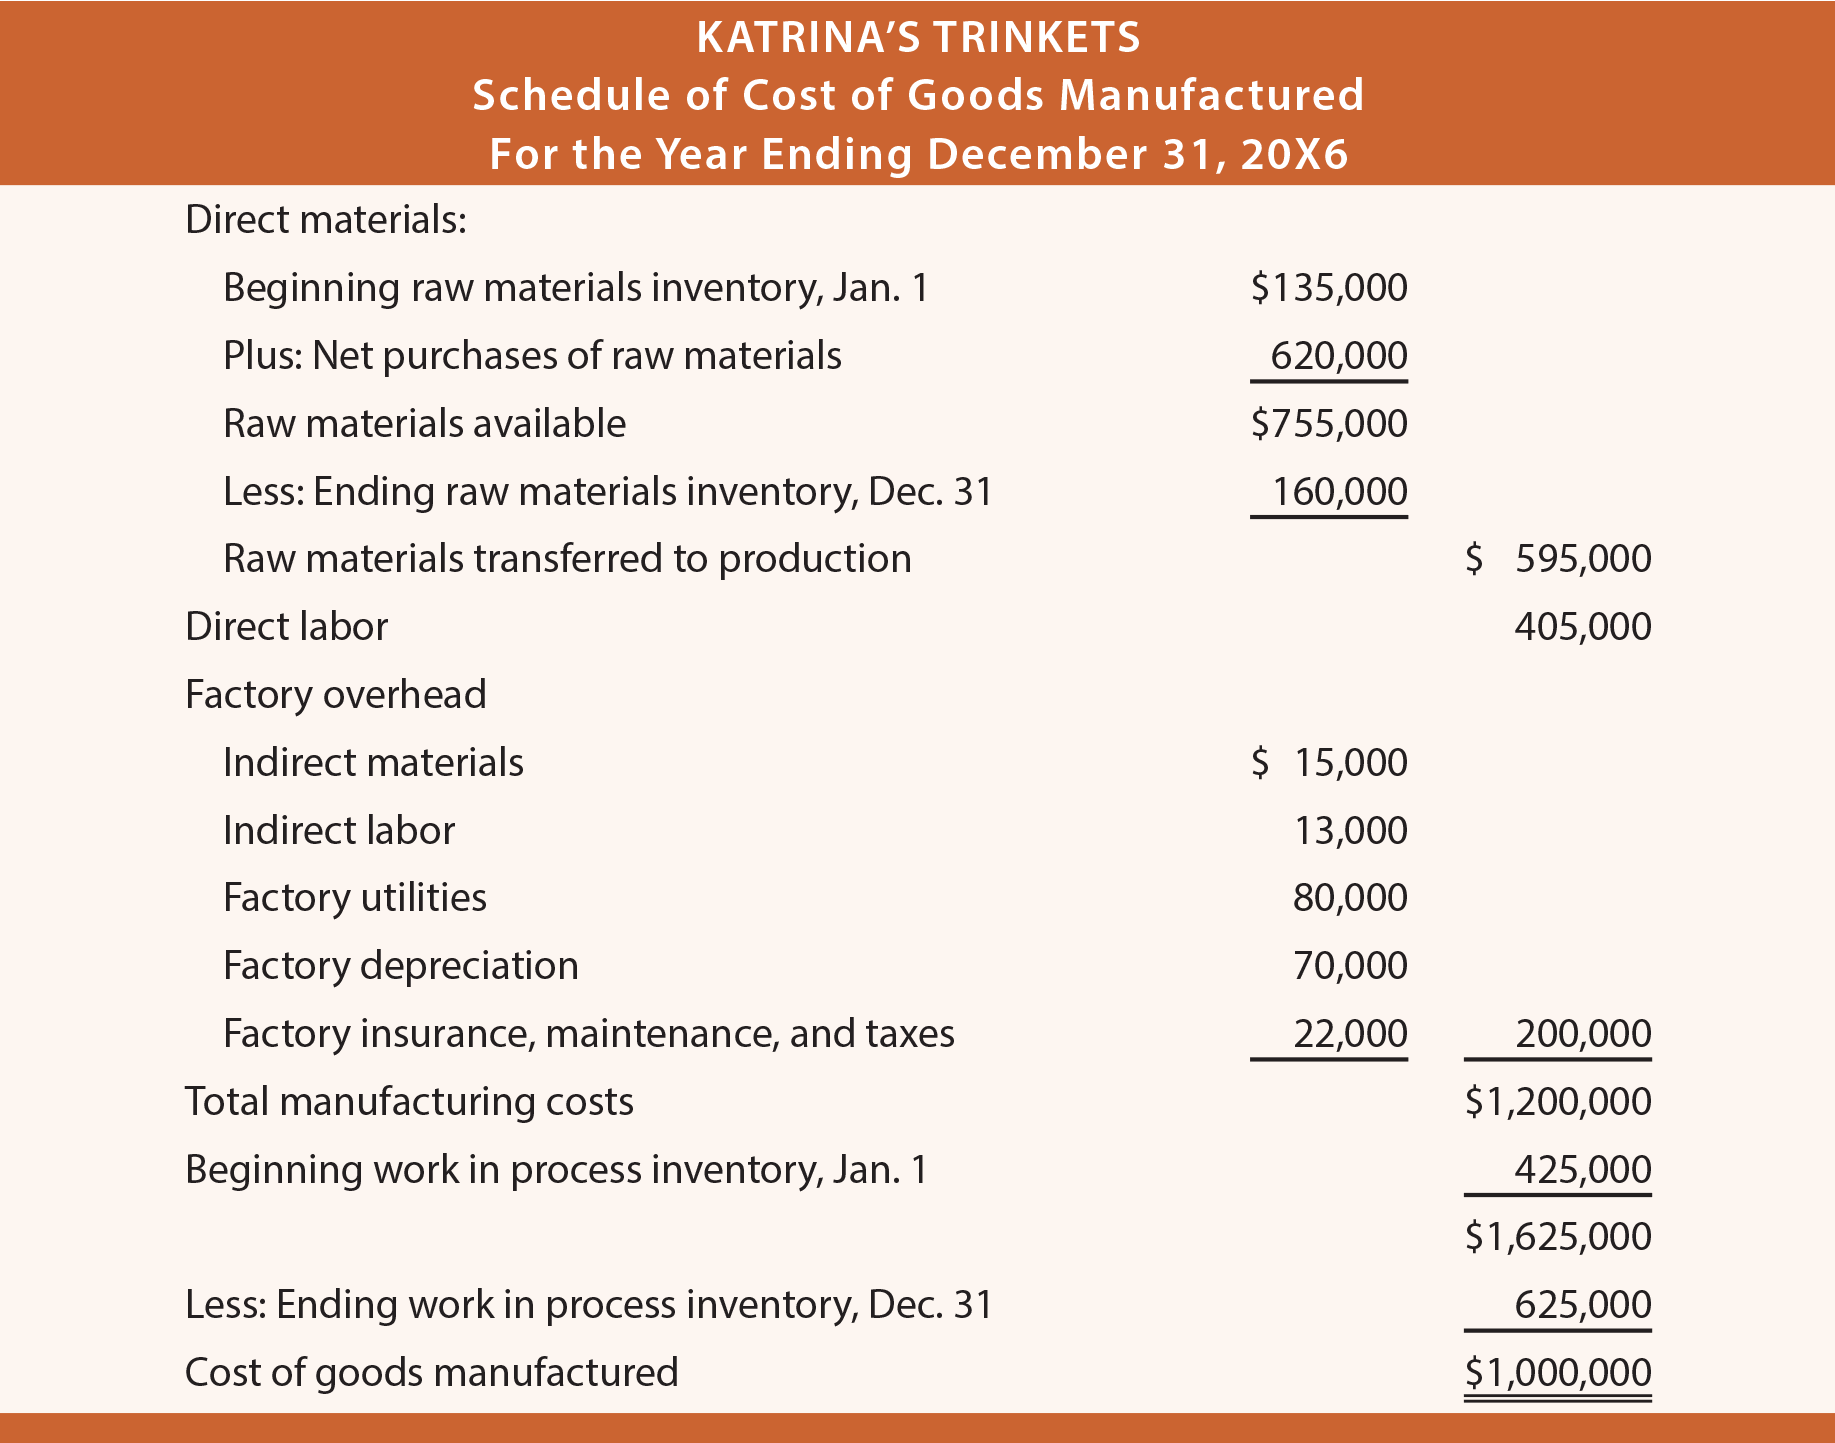 Schedule of Cost of Goods Manufactured